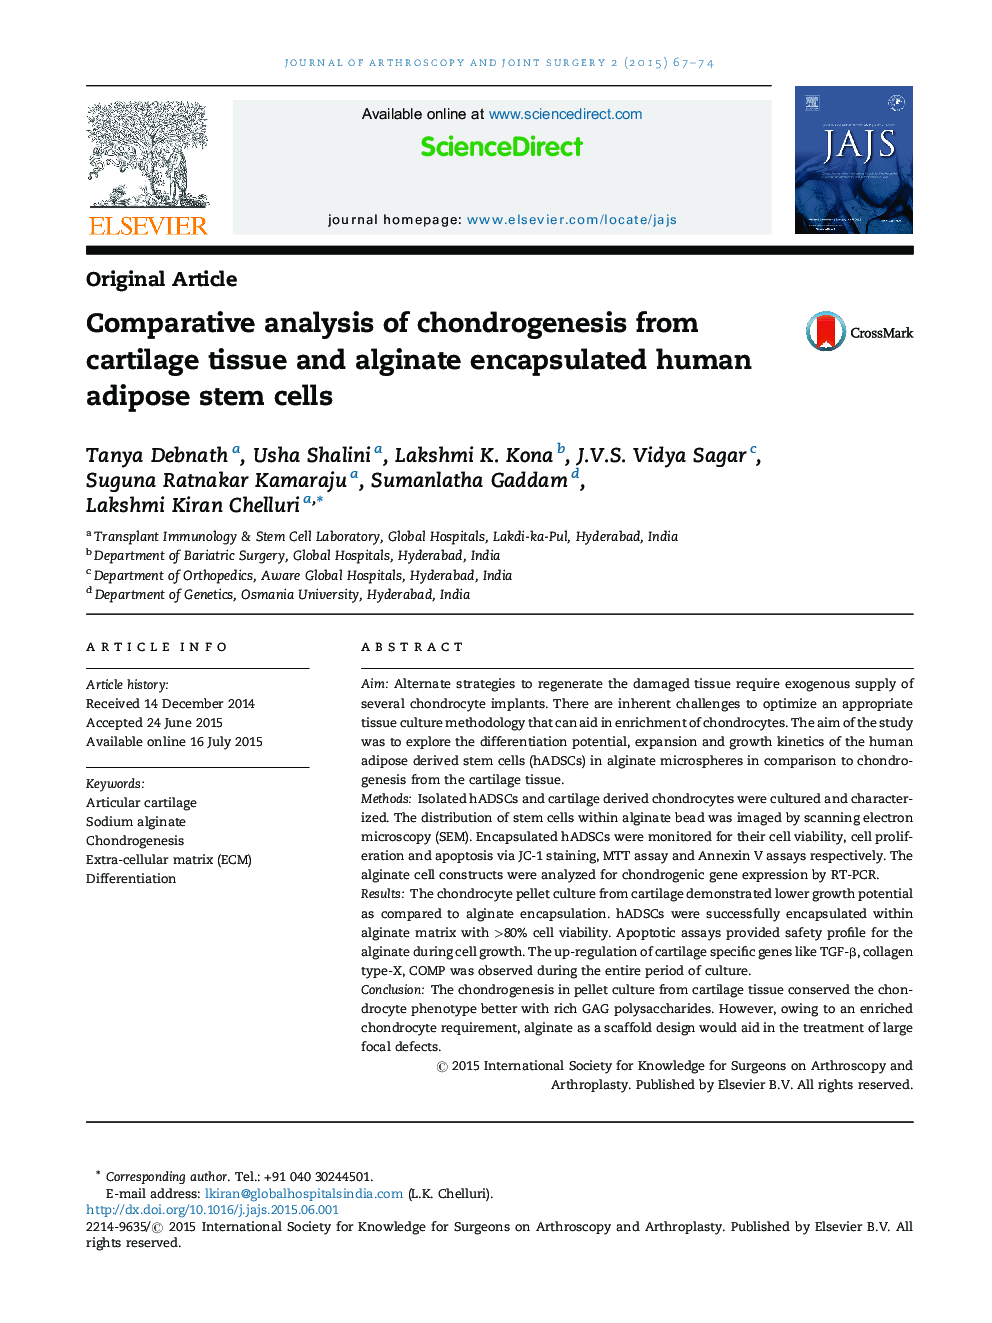 Comparative analysis of chondrogenesis from cartilage tissue and alginate encapsulated human adipose stem cells